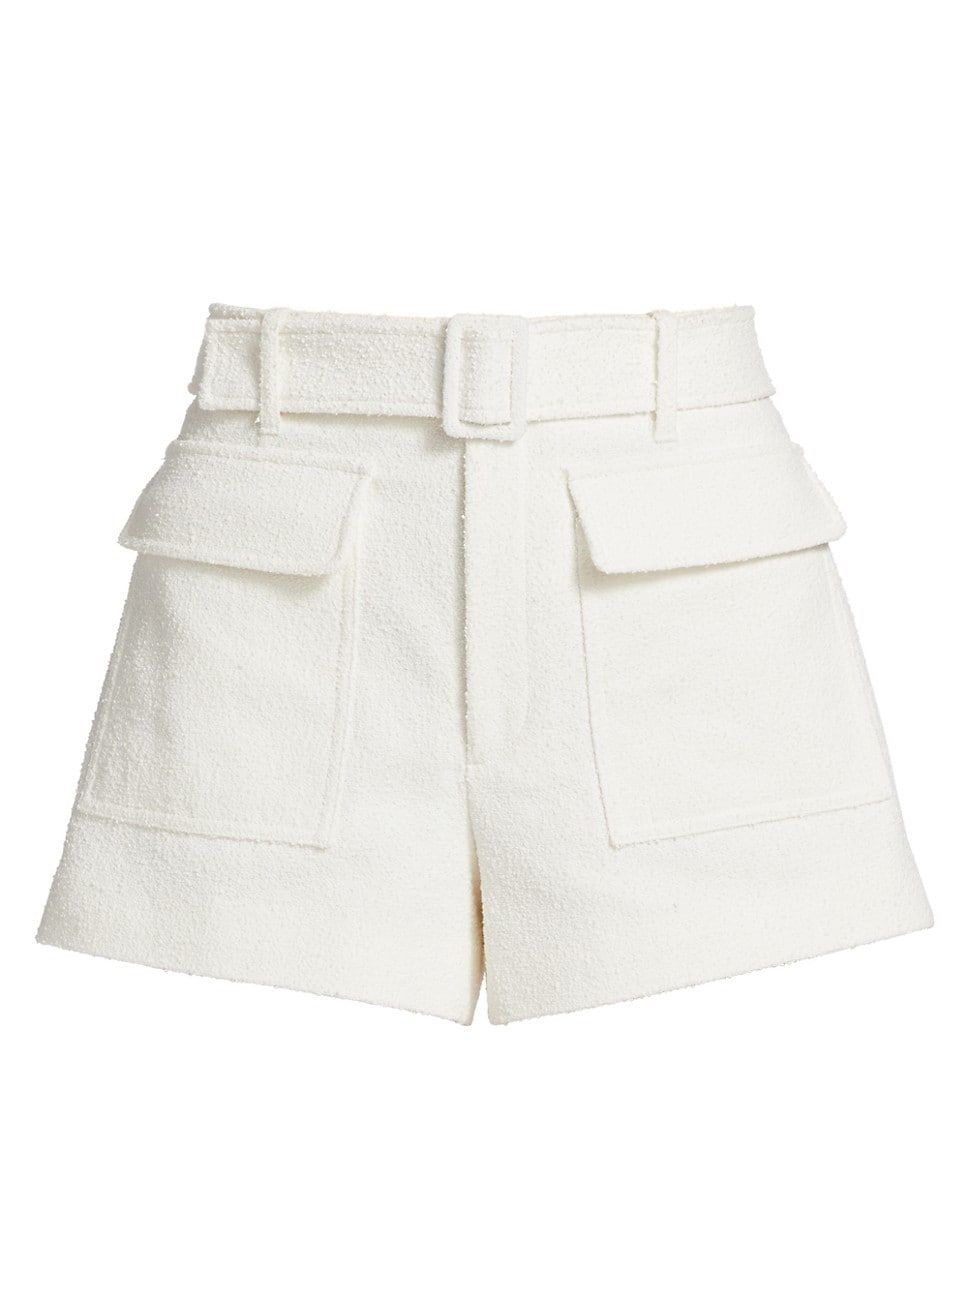 Oakland Textured Belted Shorts | Saks Fifth Avenue